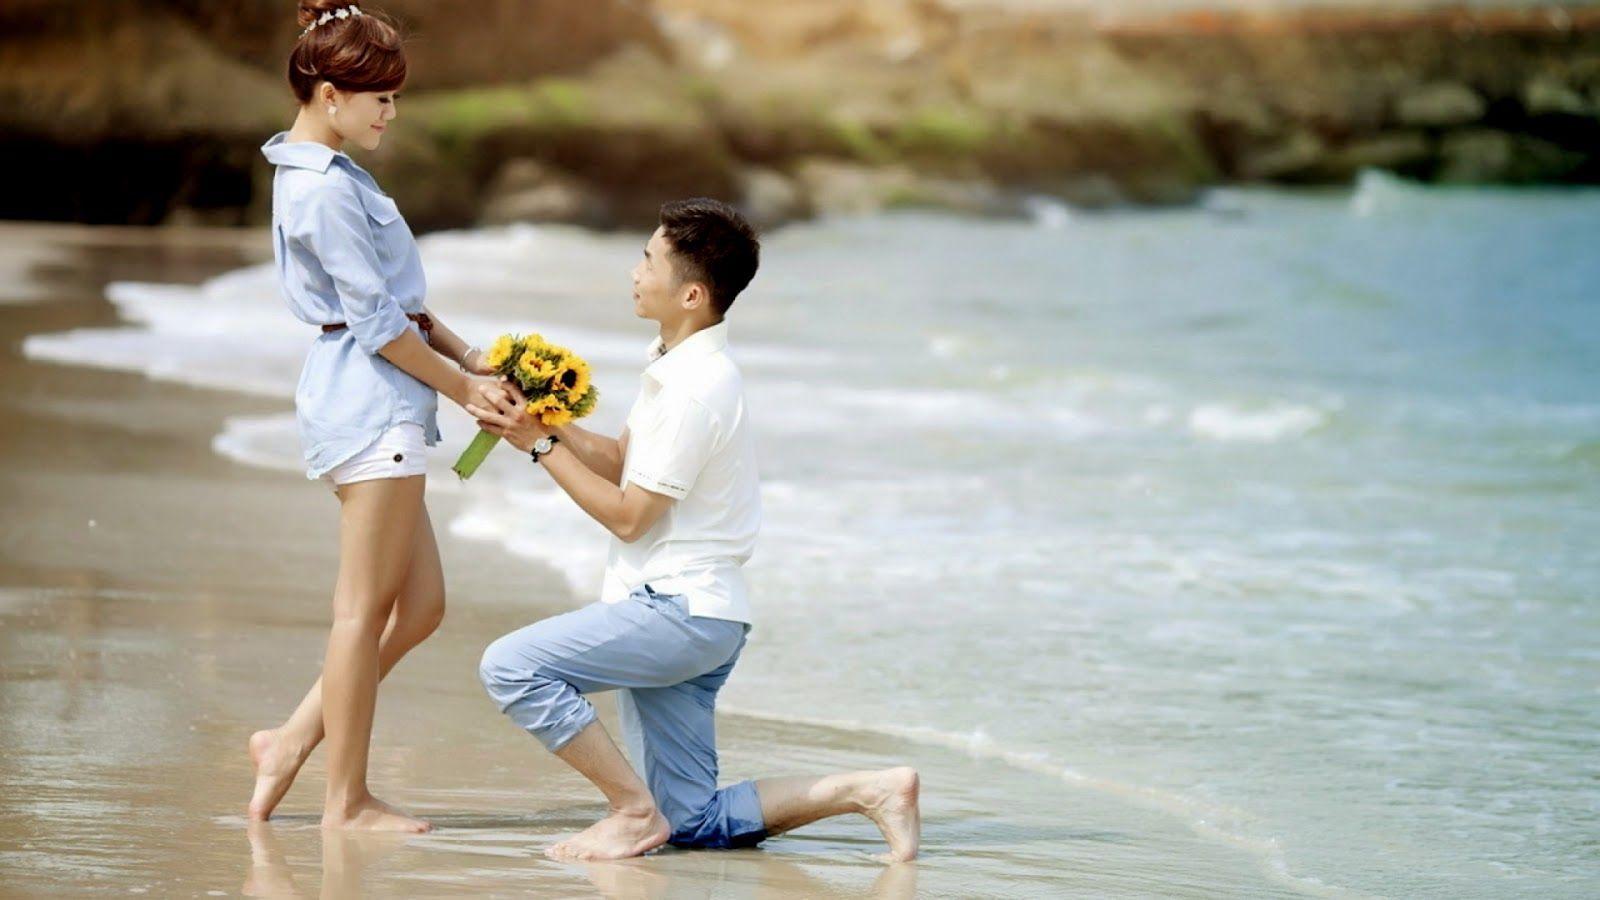 Happy Propose Day Wallpaper HD Download Free 1080p. Happy